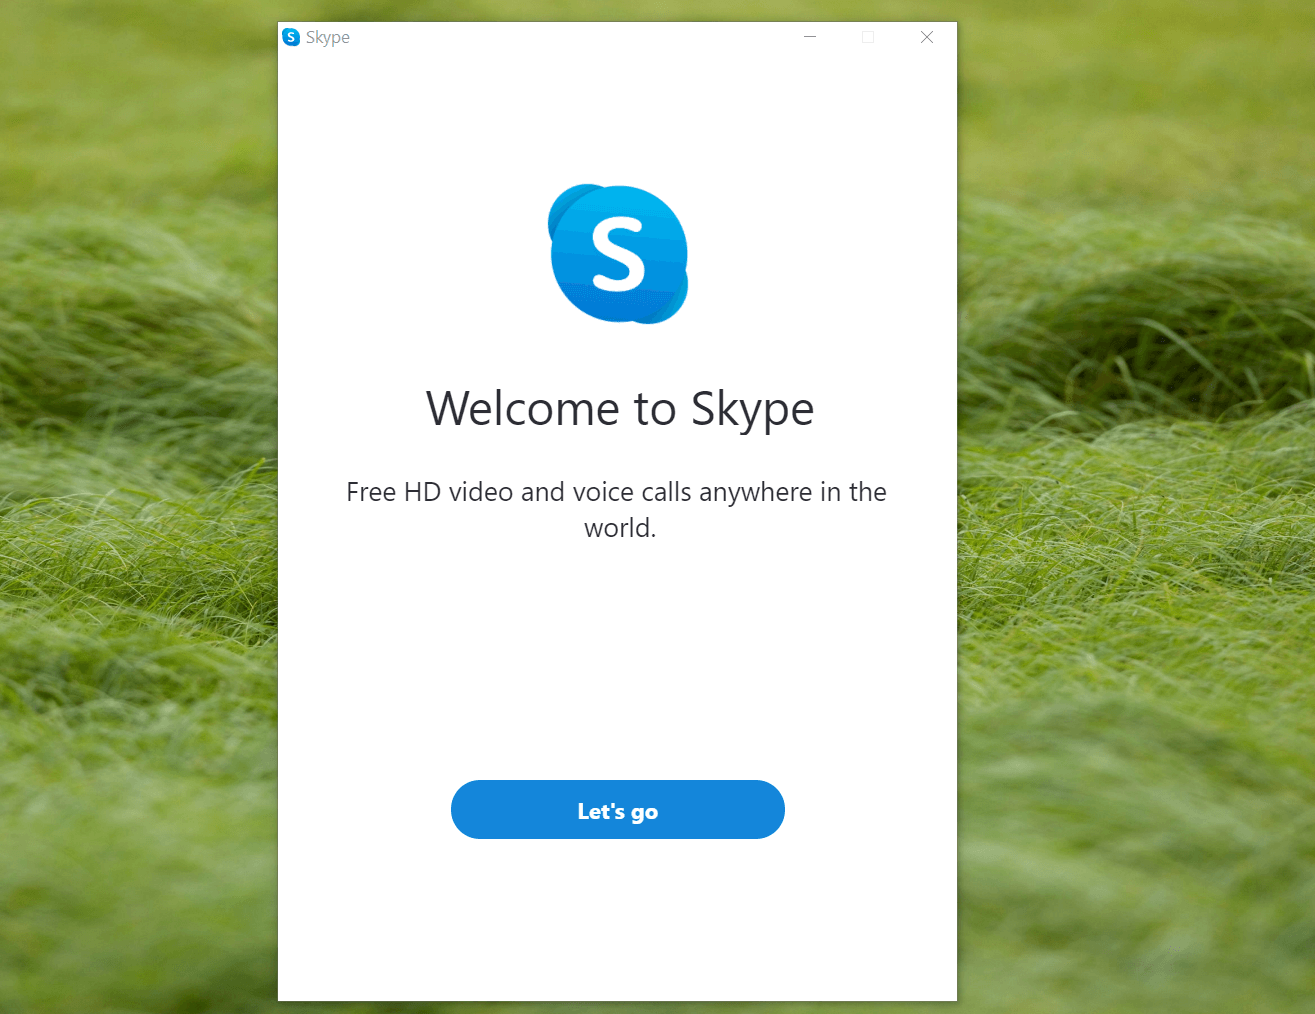 Skype And Space Jam Team Up And Offer Ends On August 31st